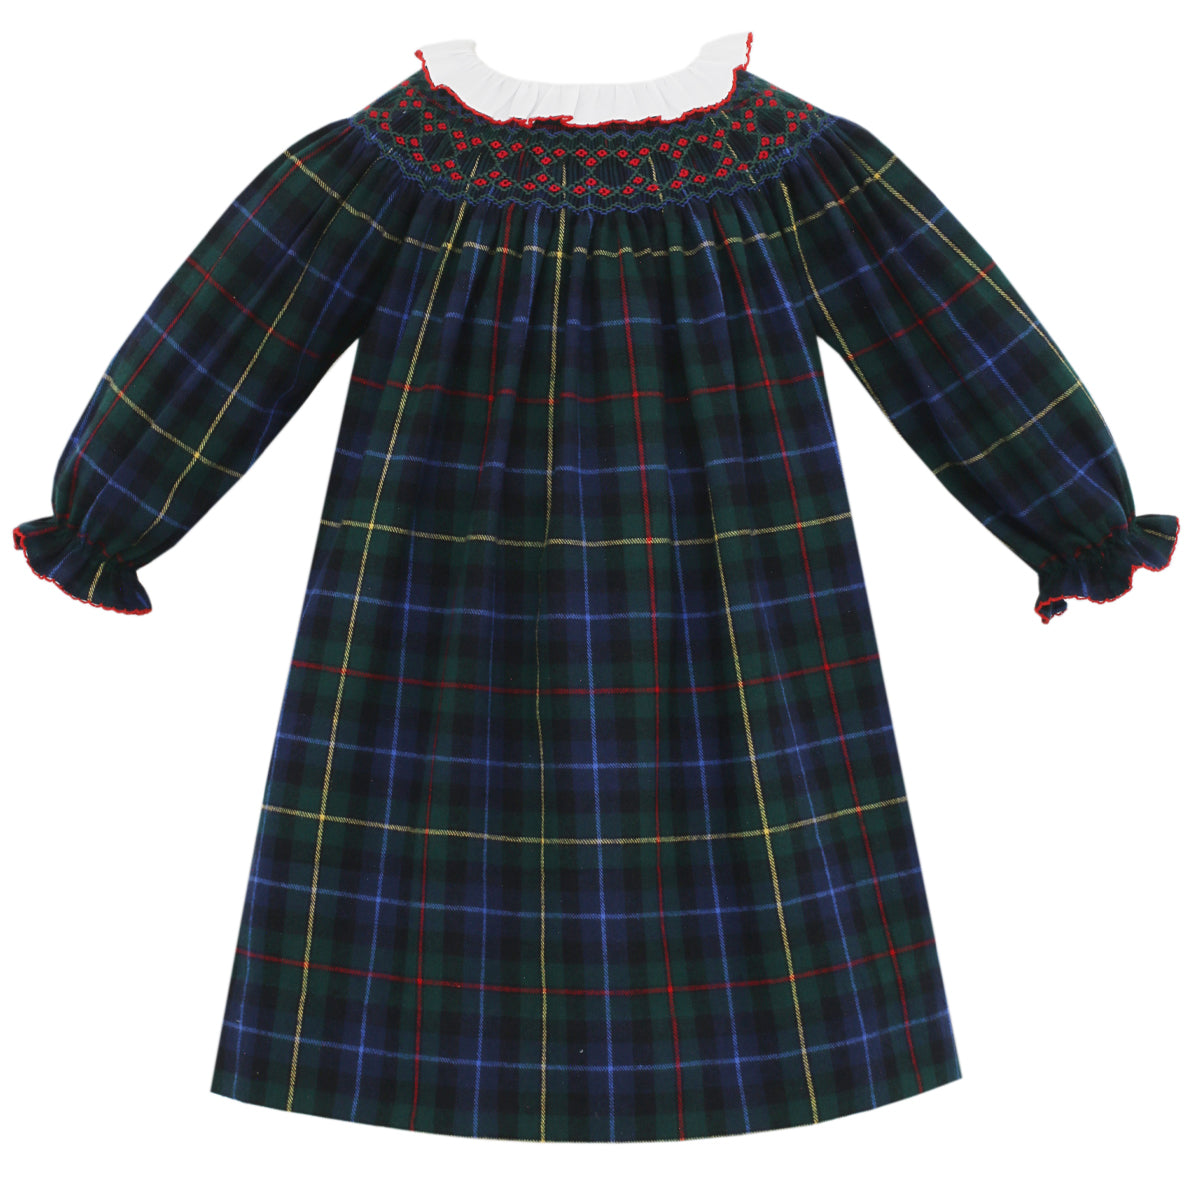 Ryley Green & Navy Plaid Dress With White Ruffled Collar